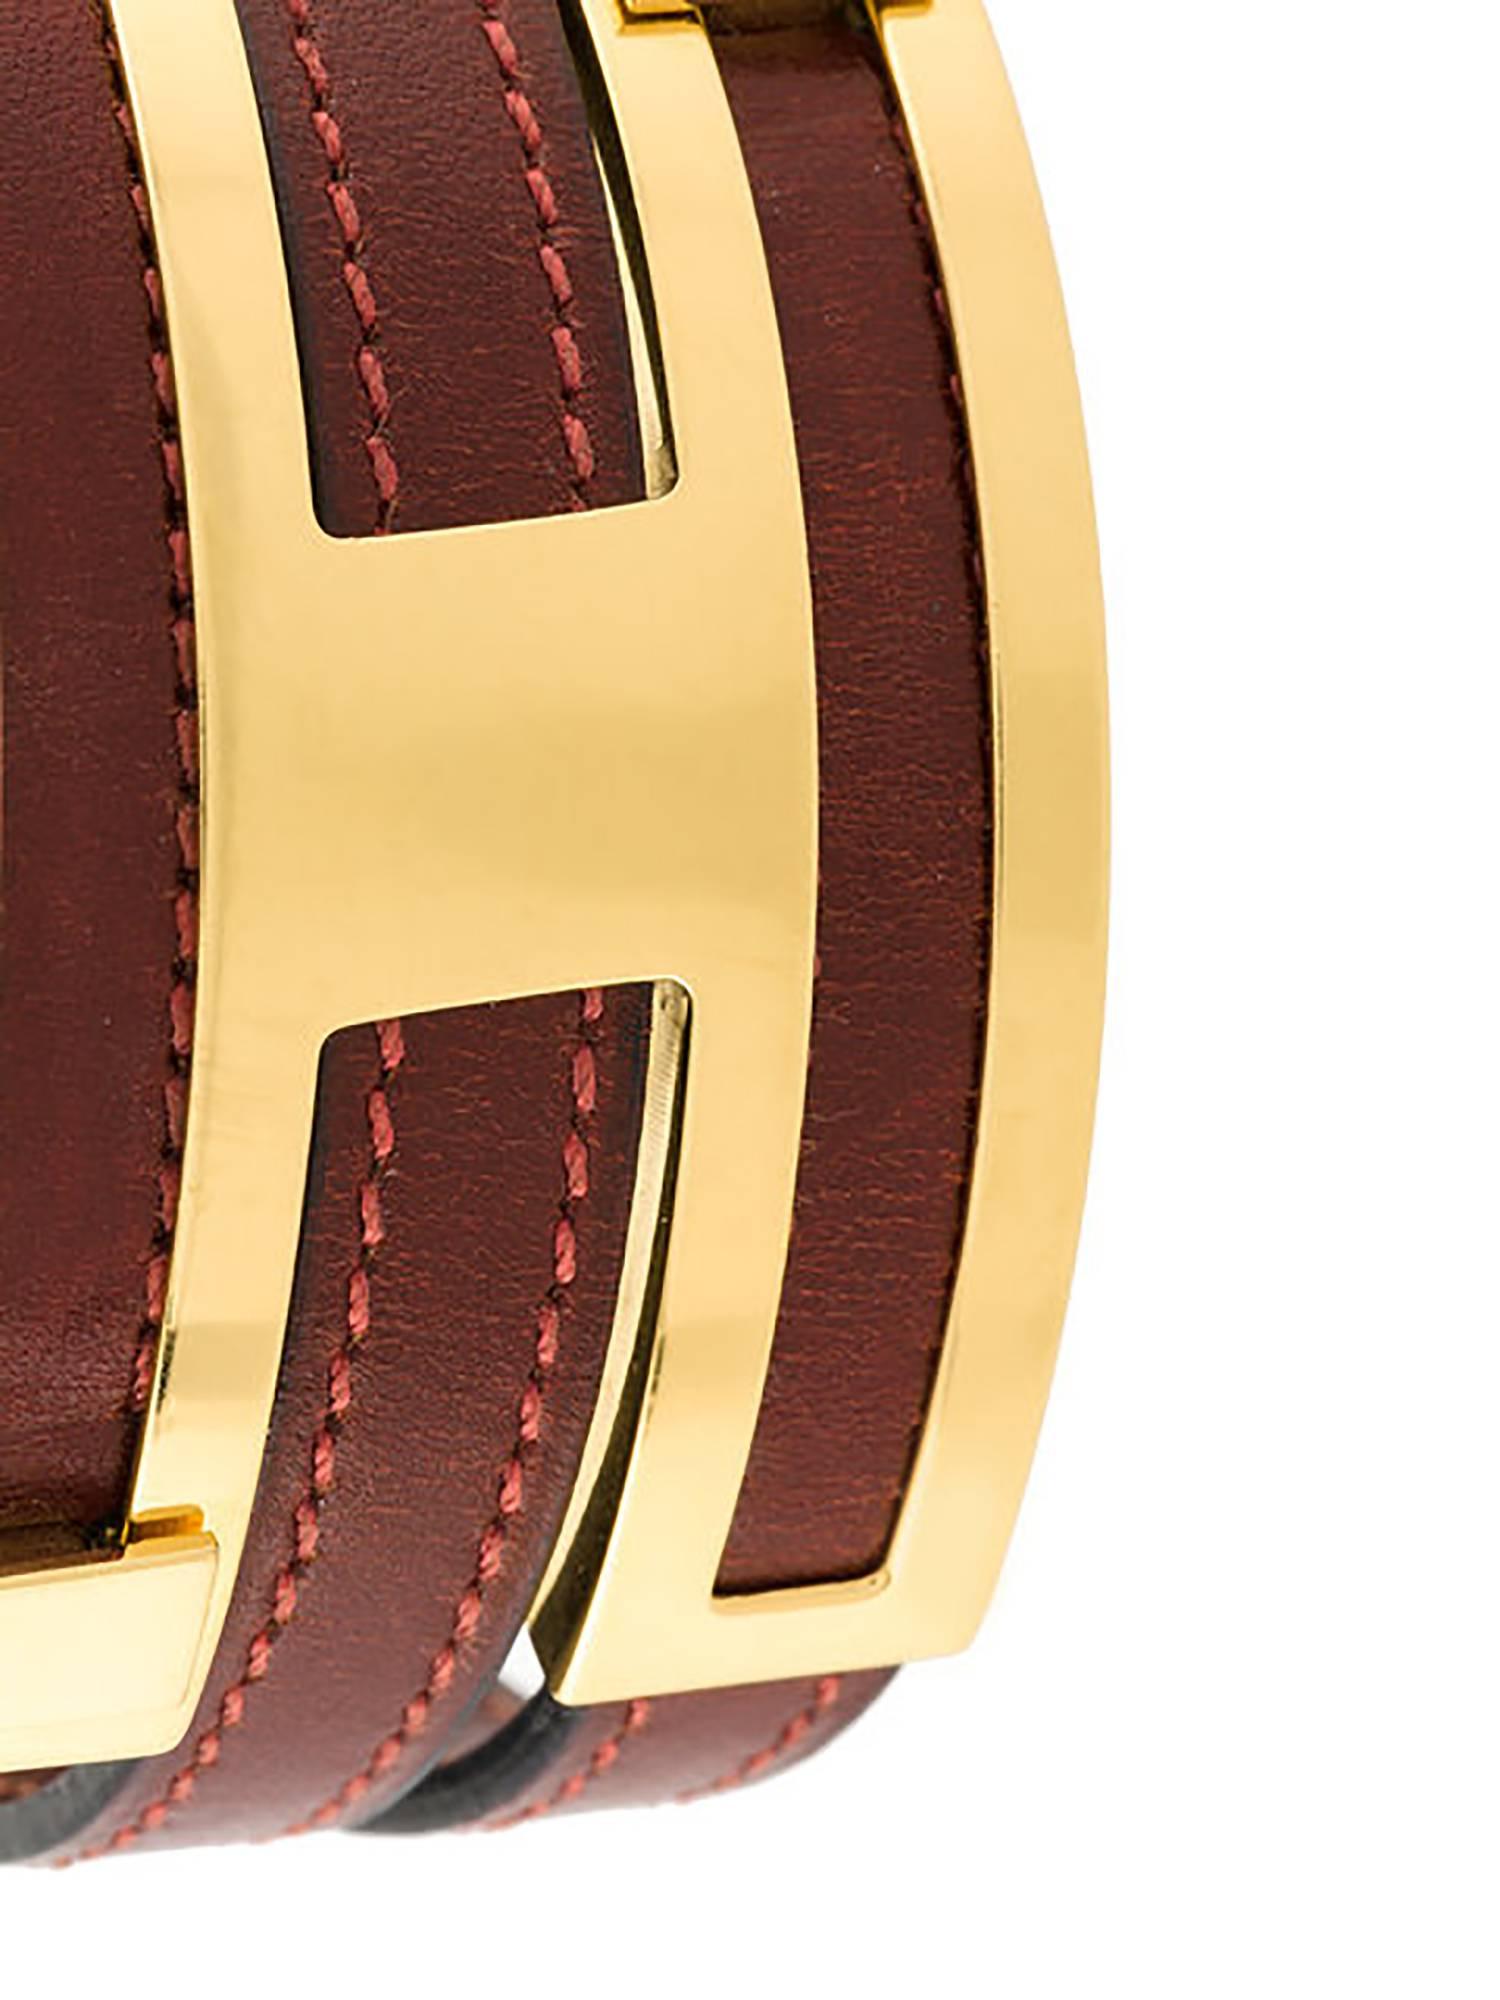 Hermès’ famed leather bracelets are perfect for stacking. This particular design features a dark red leather strap that wraps into an H-shaped clasp. The width of the straps is adjusted by the simple push of the gold-plated dials along the lines of